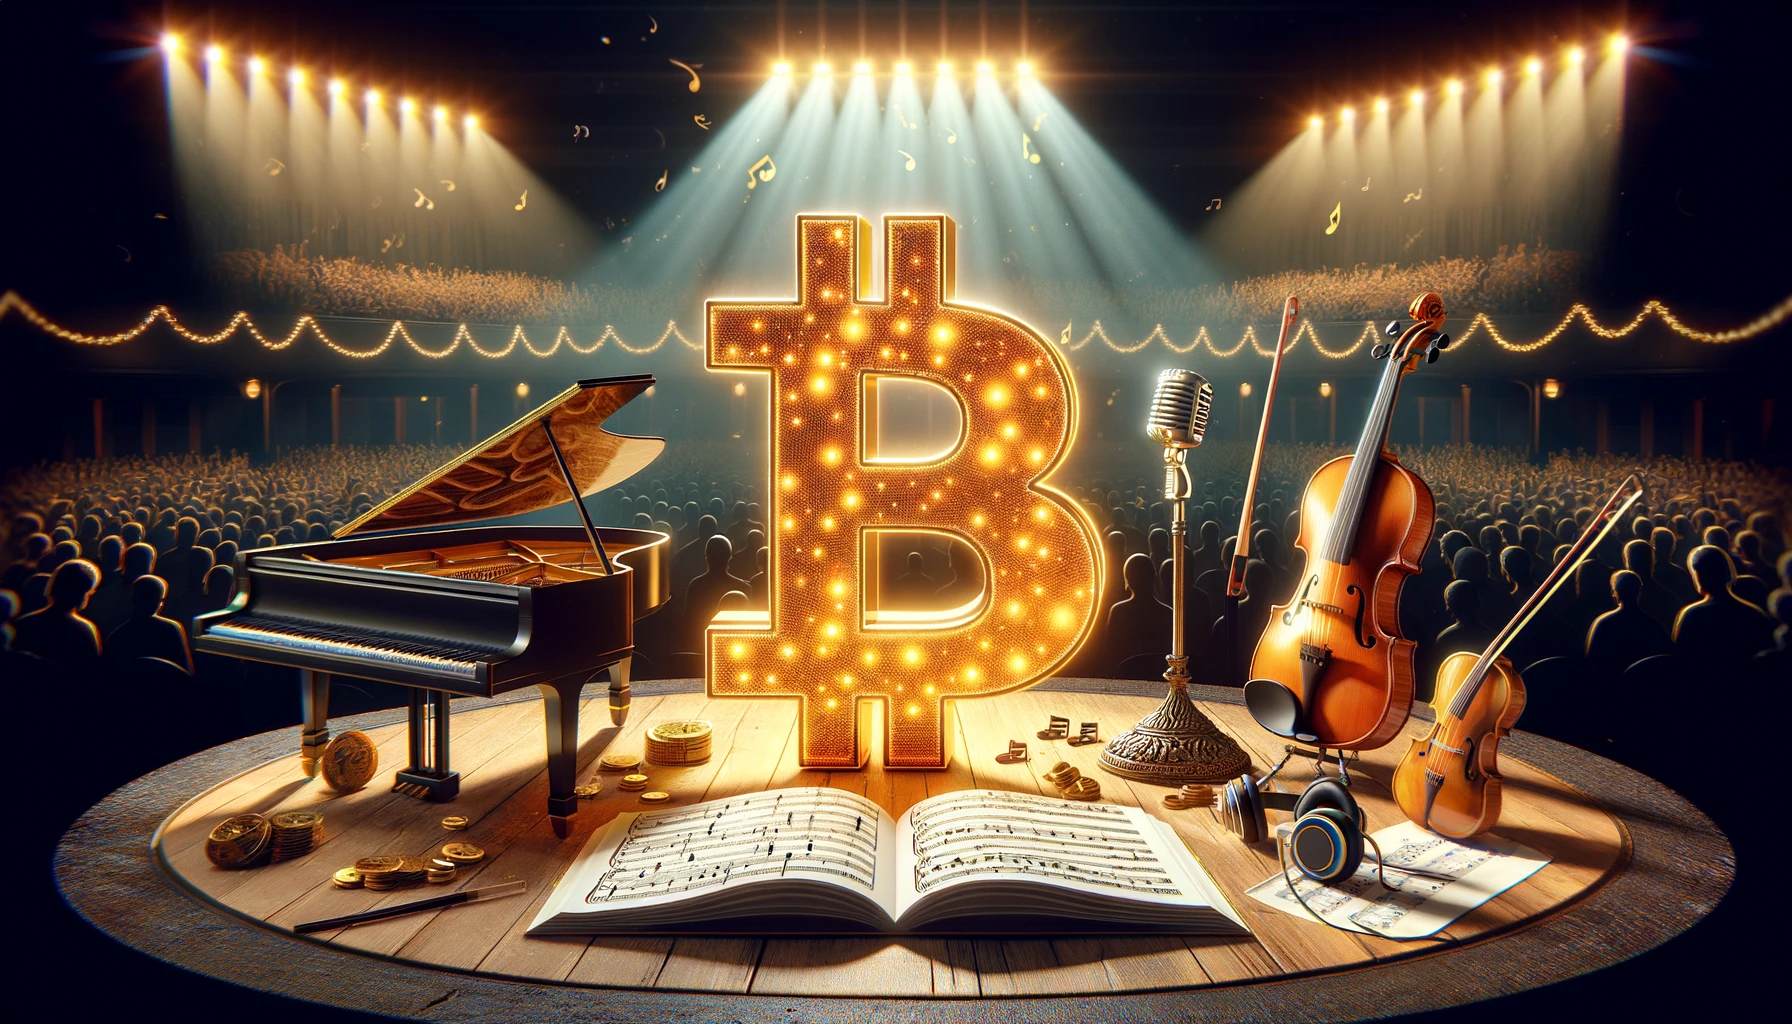 scene combining the themes of Bitcoin and music. In the foreground, a large, luminous Bitcoin symbol stands prominently